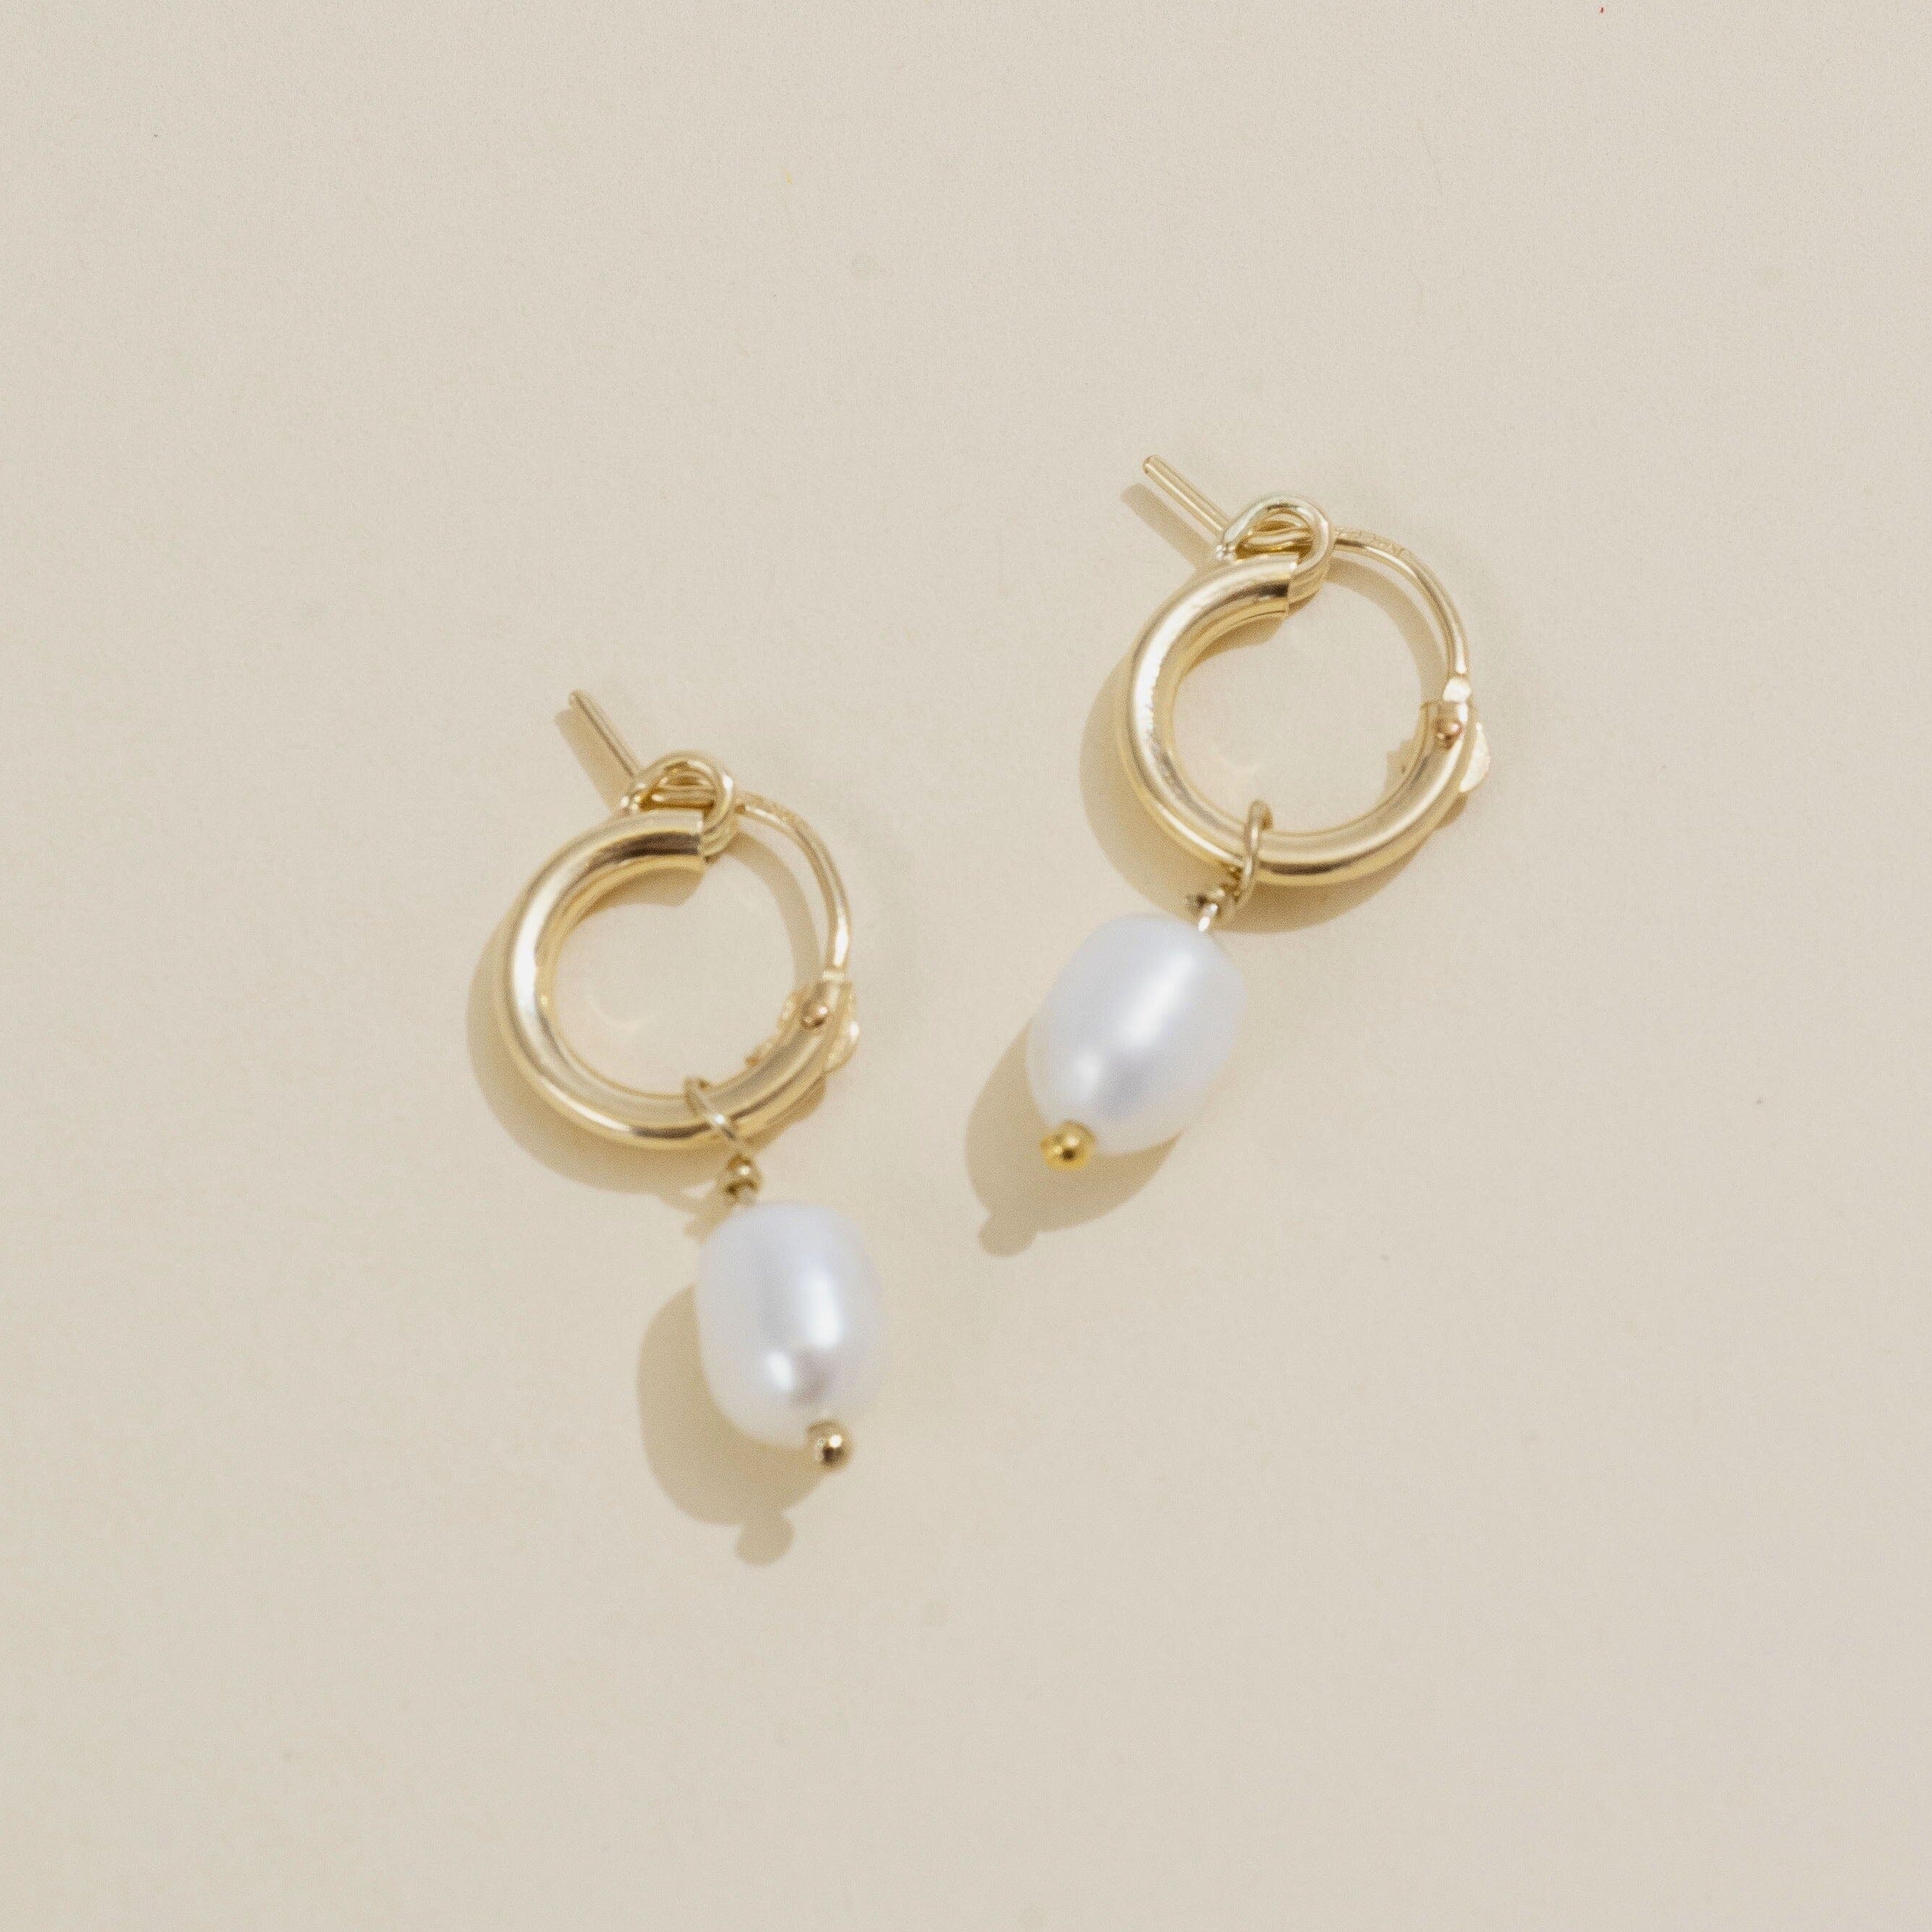 Dainty gold Pearl hoops by Katie Dean Jewelry as seen on a tan background.